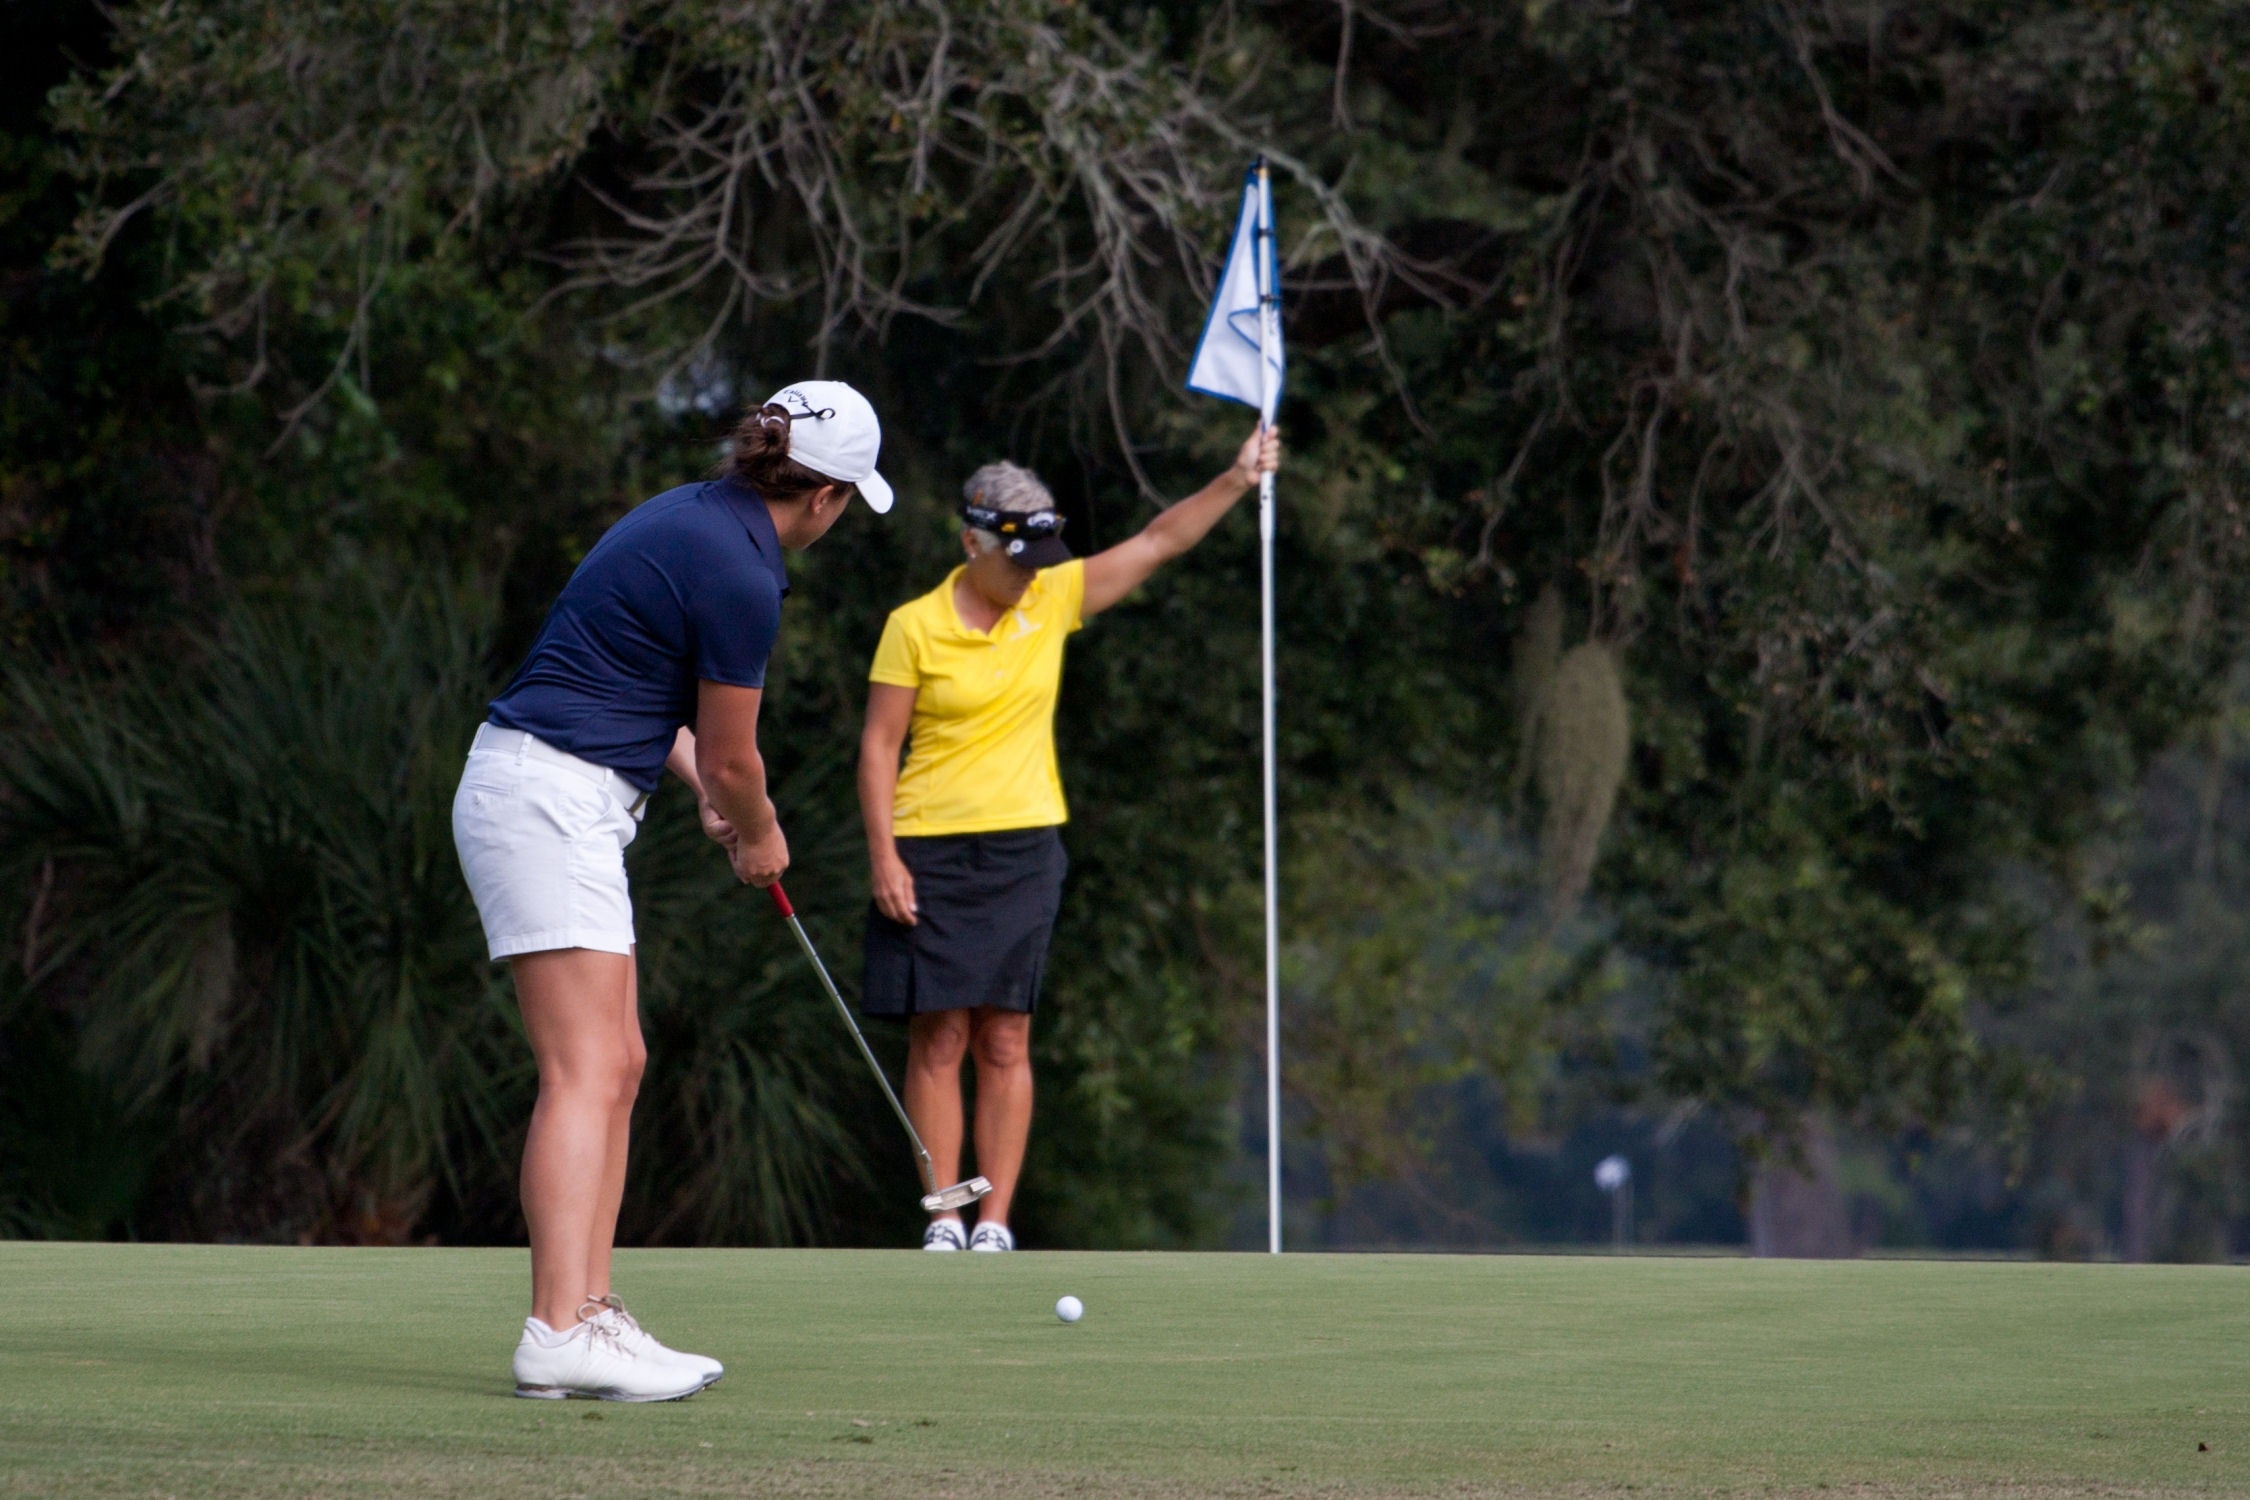 What is a hole in one called in golf? Why is it so coveted among golfers?